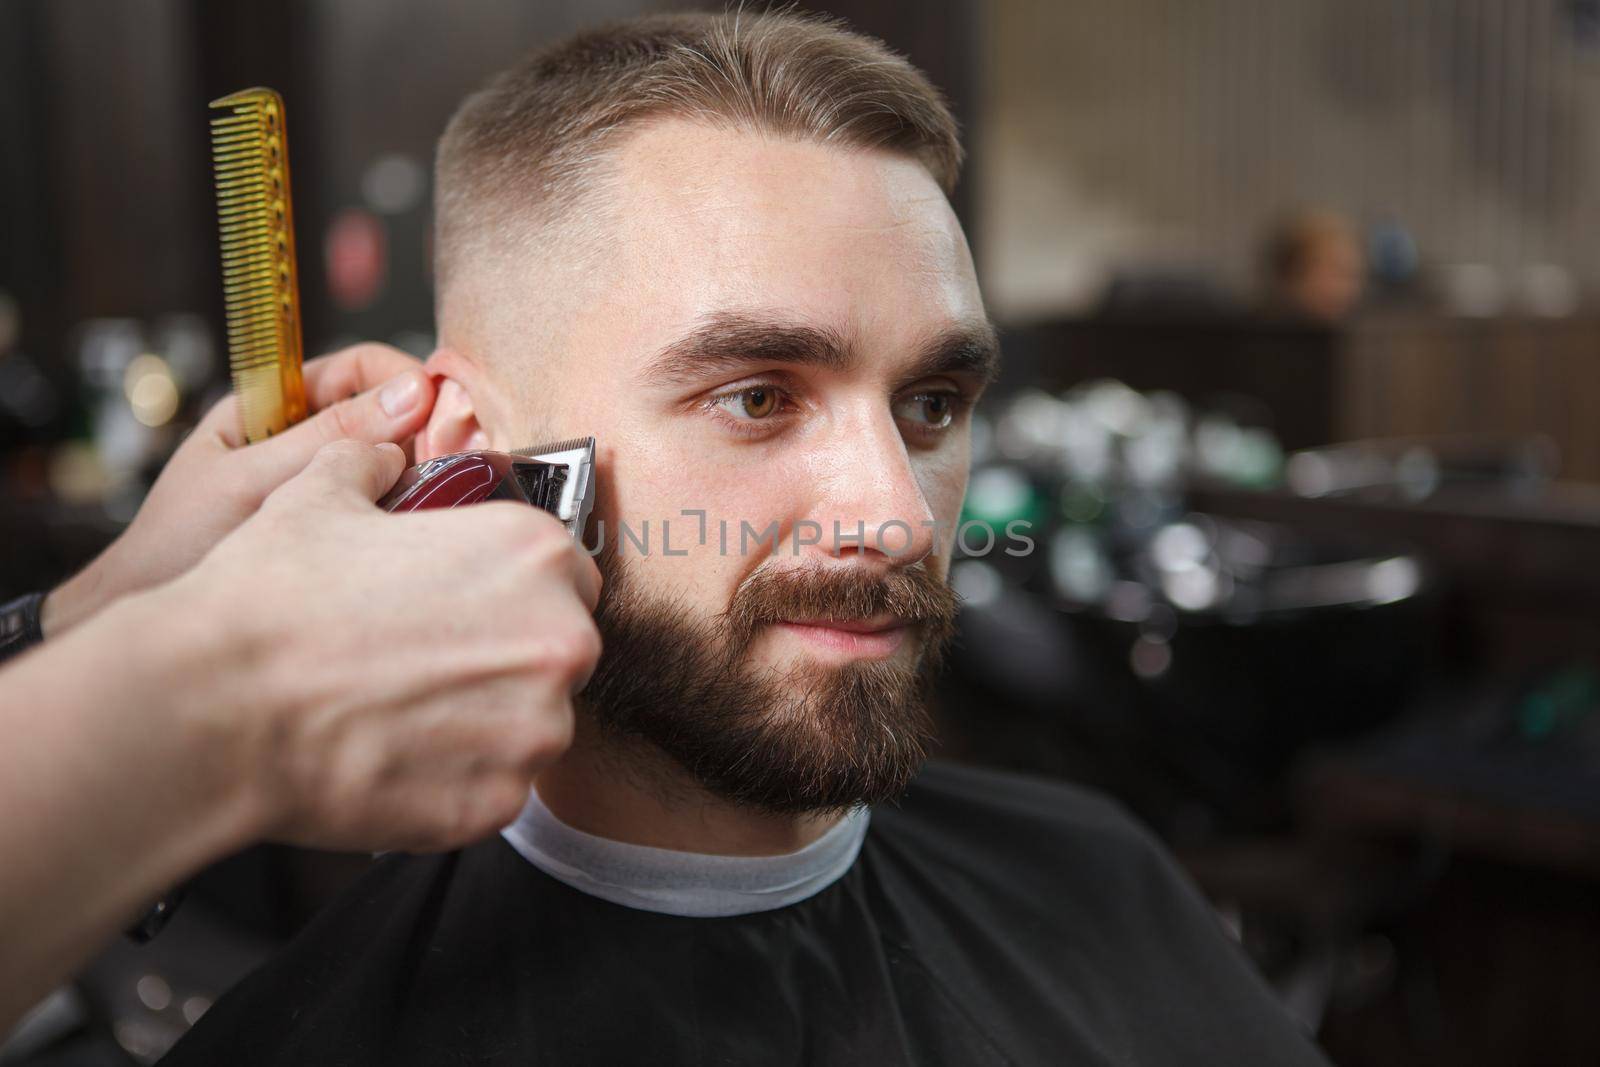 Close up of a handsome bearded man getting his hair trimmed by professional barber